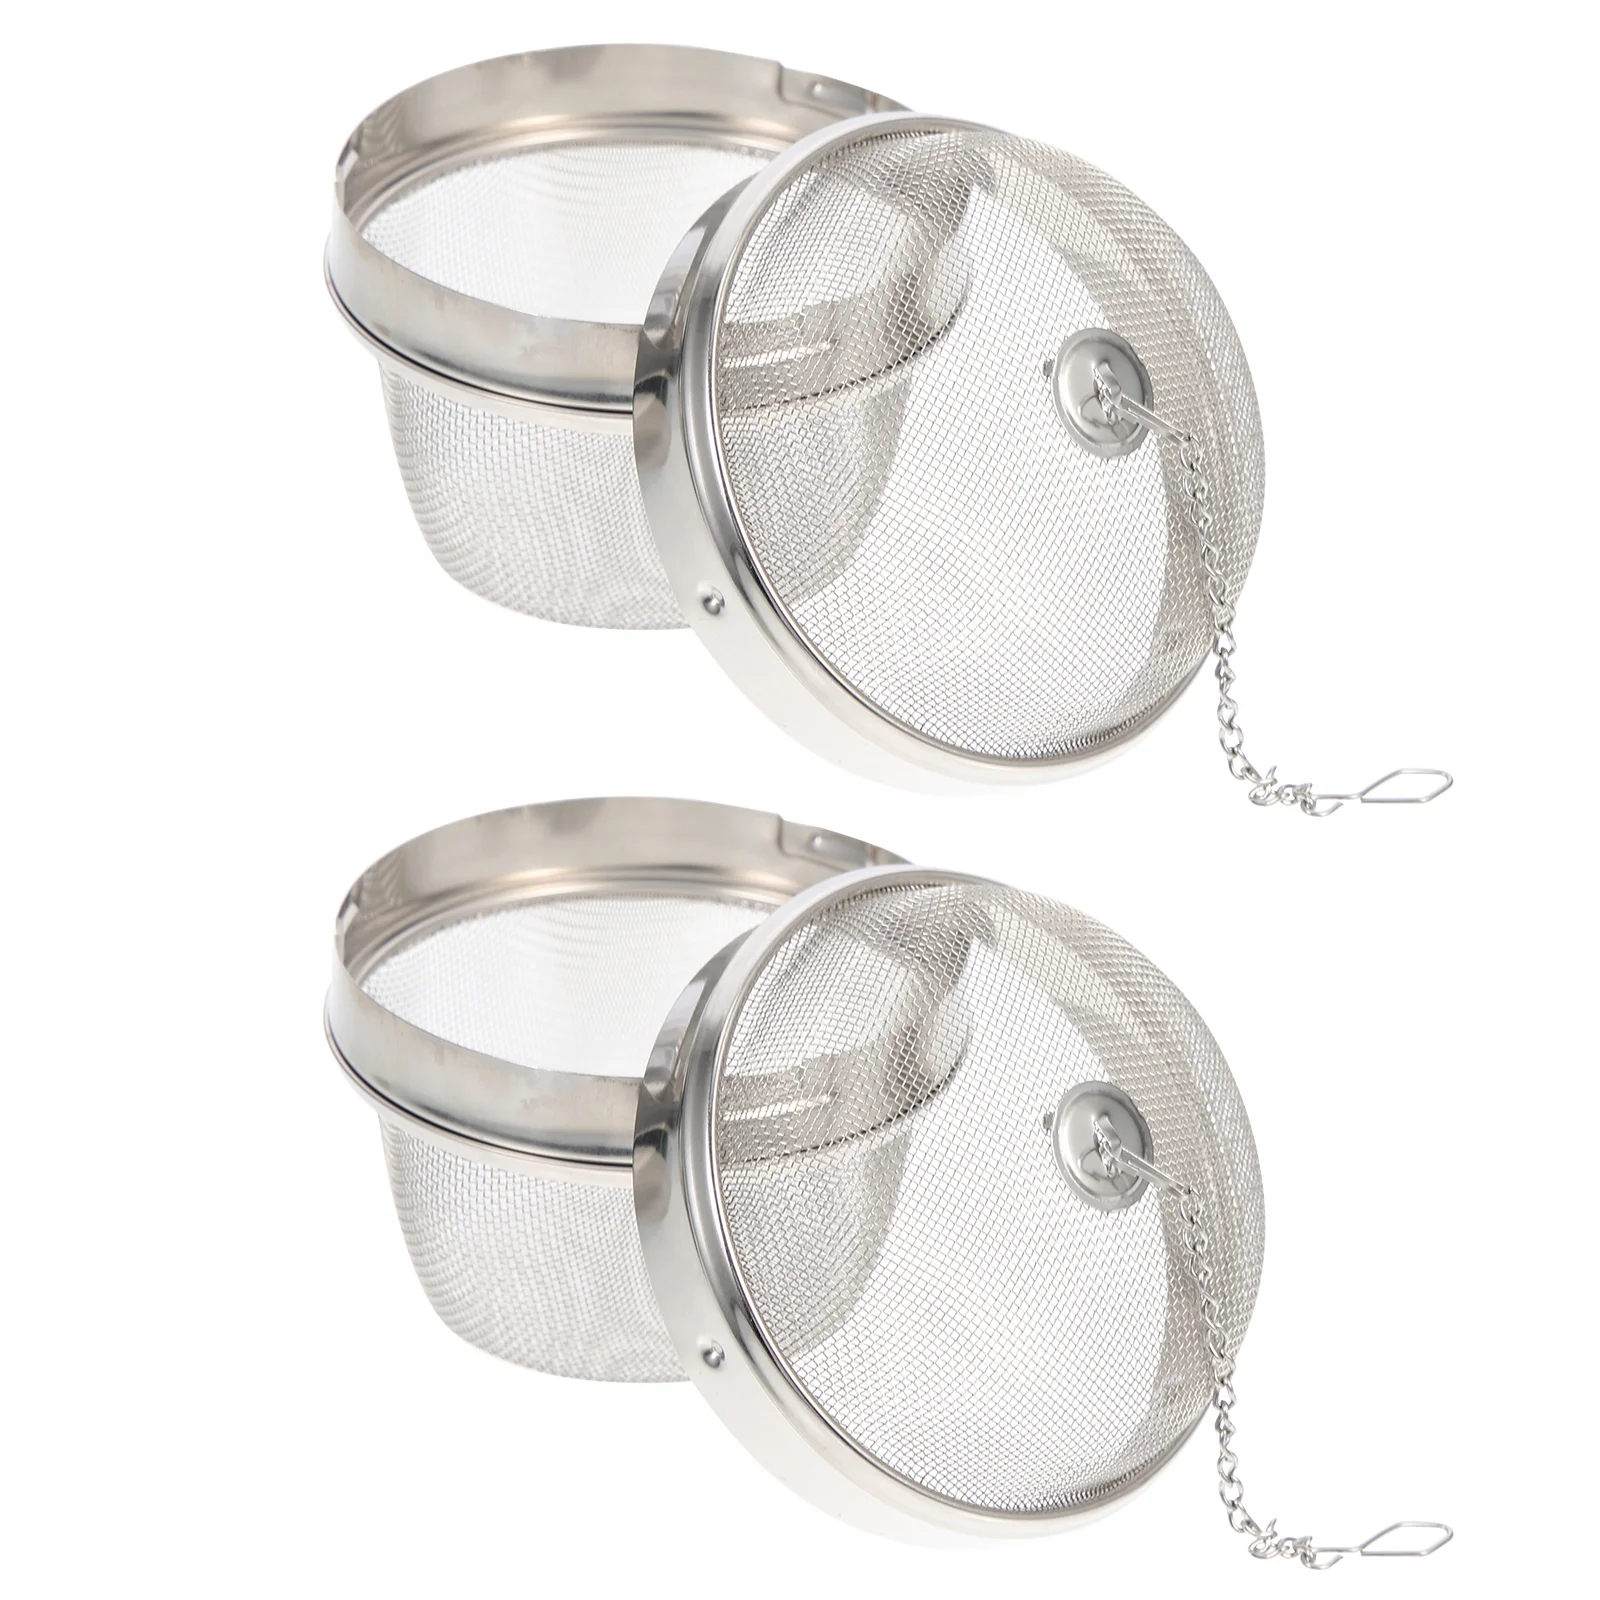 

2Pcs Multi-function Jewelry Clean Basket Stainless Steel Seasoning Infuser Balls Kitchen Soup Strainer Balls